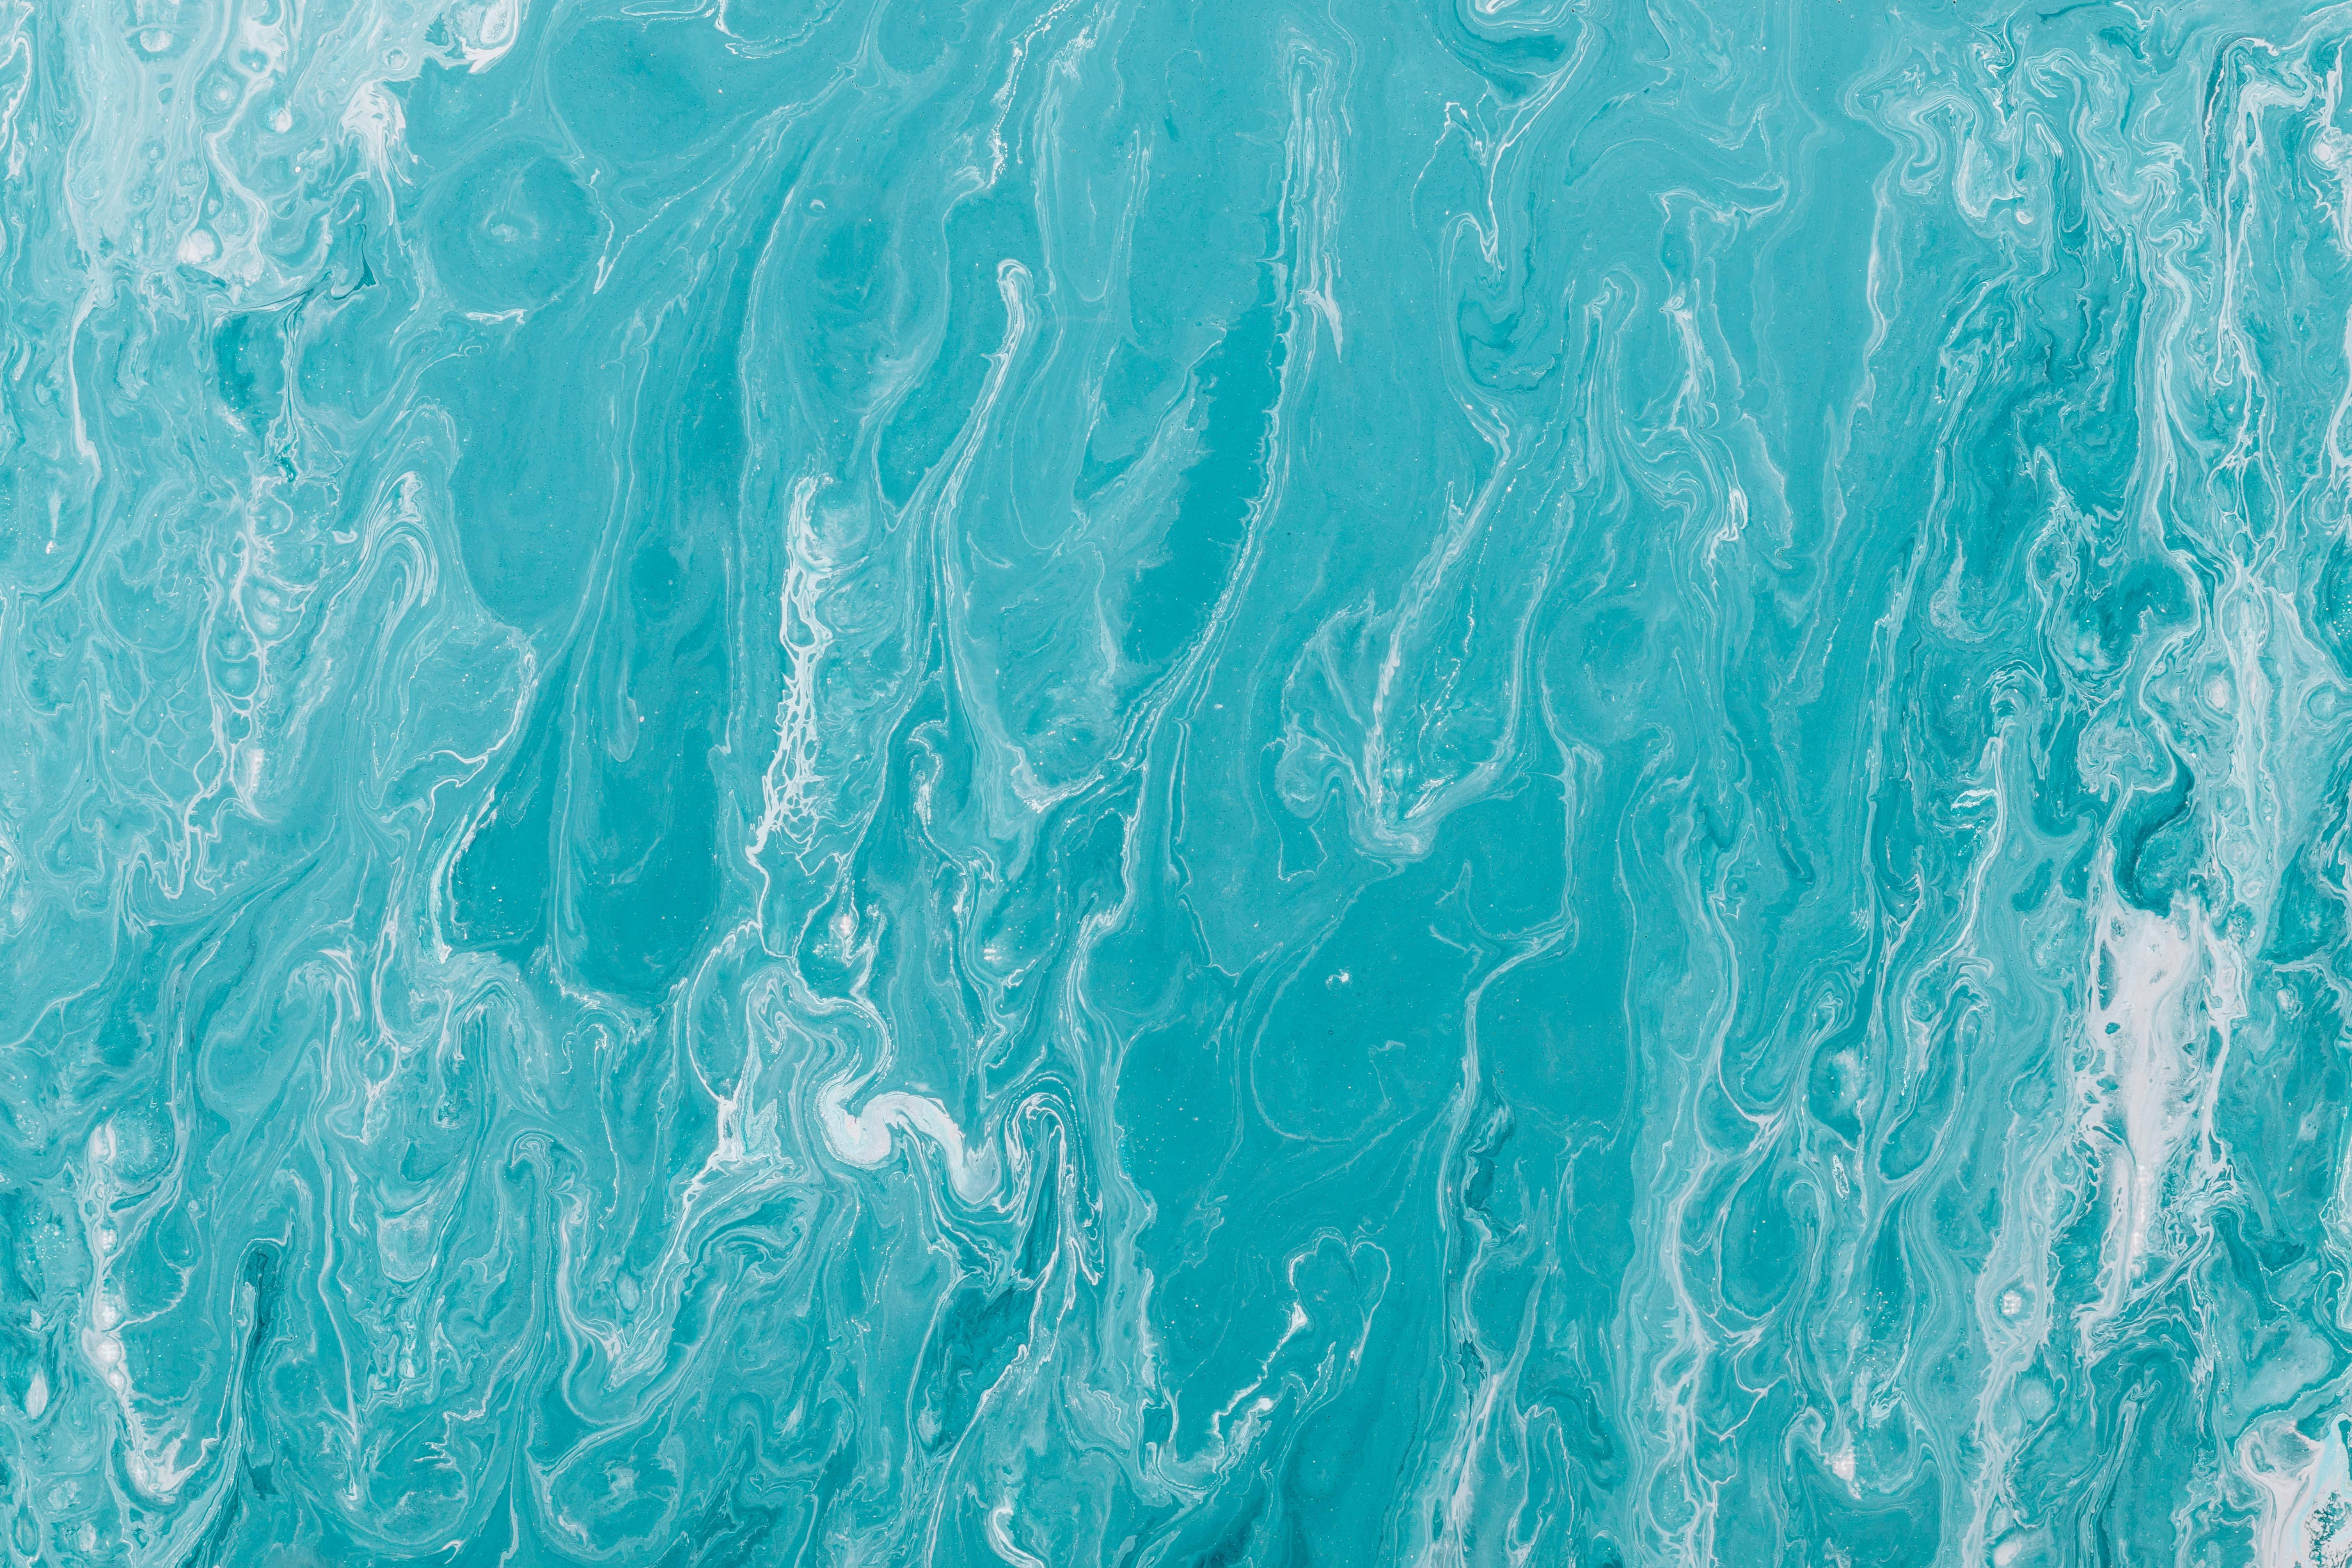 Stunning Aquatic Wave Teal Marble in 4K Resolution Wallpaper